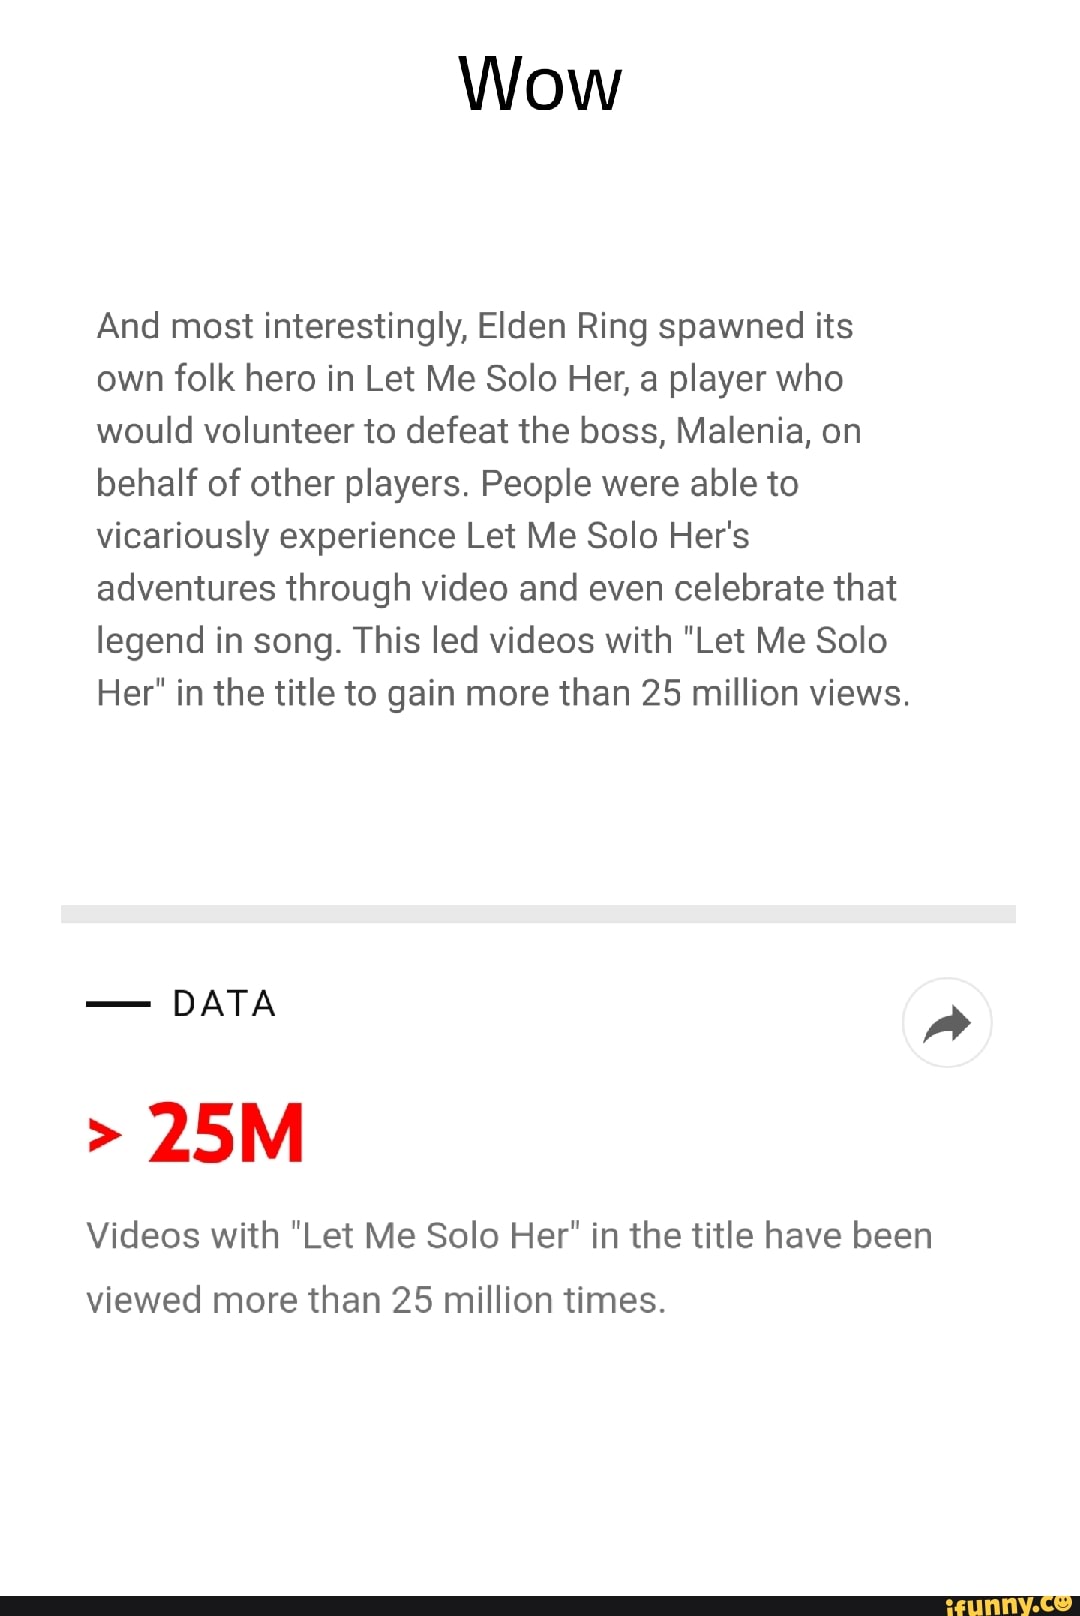 Let Me Solo Her's Video Shows How Hard Elden Ring Players Have It